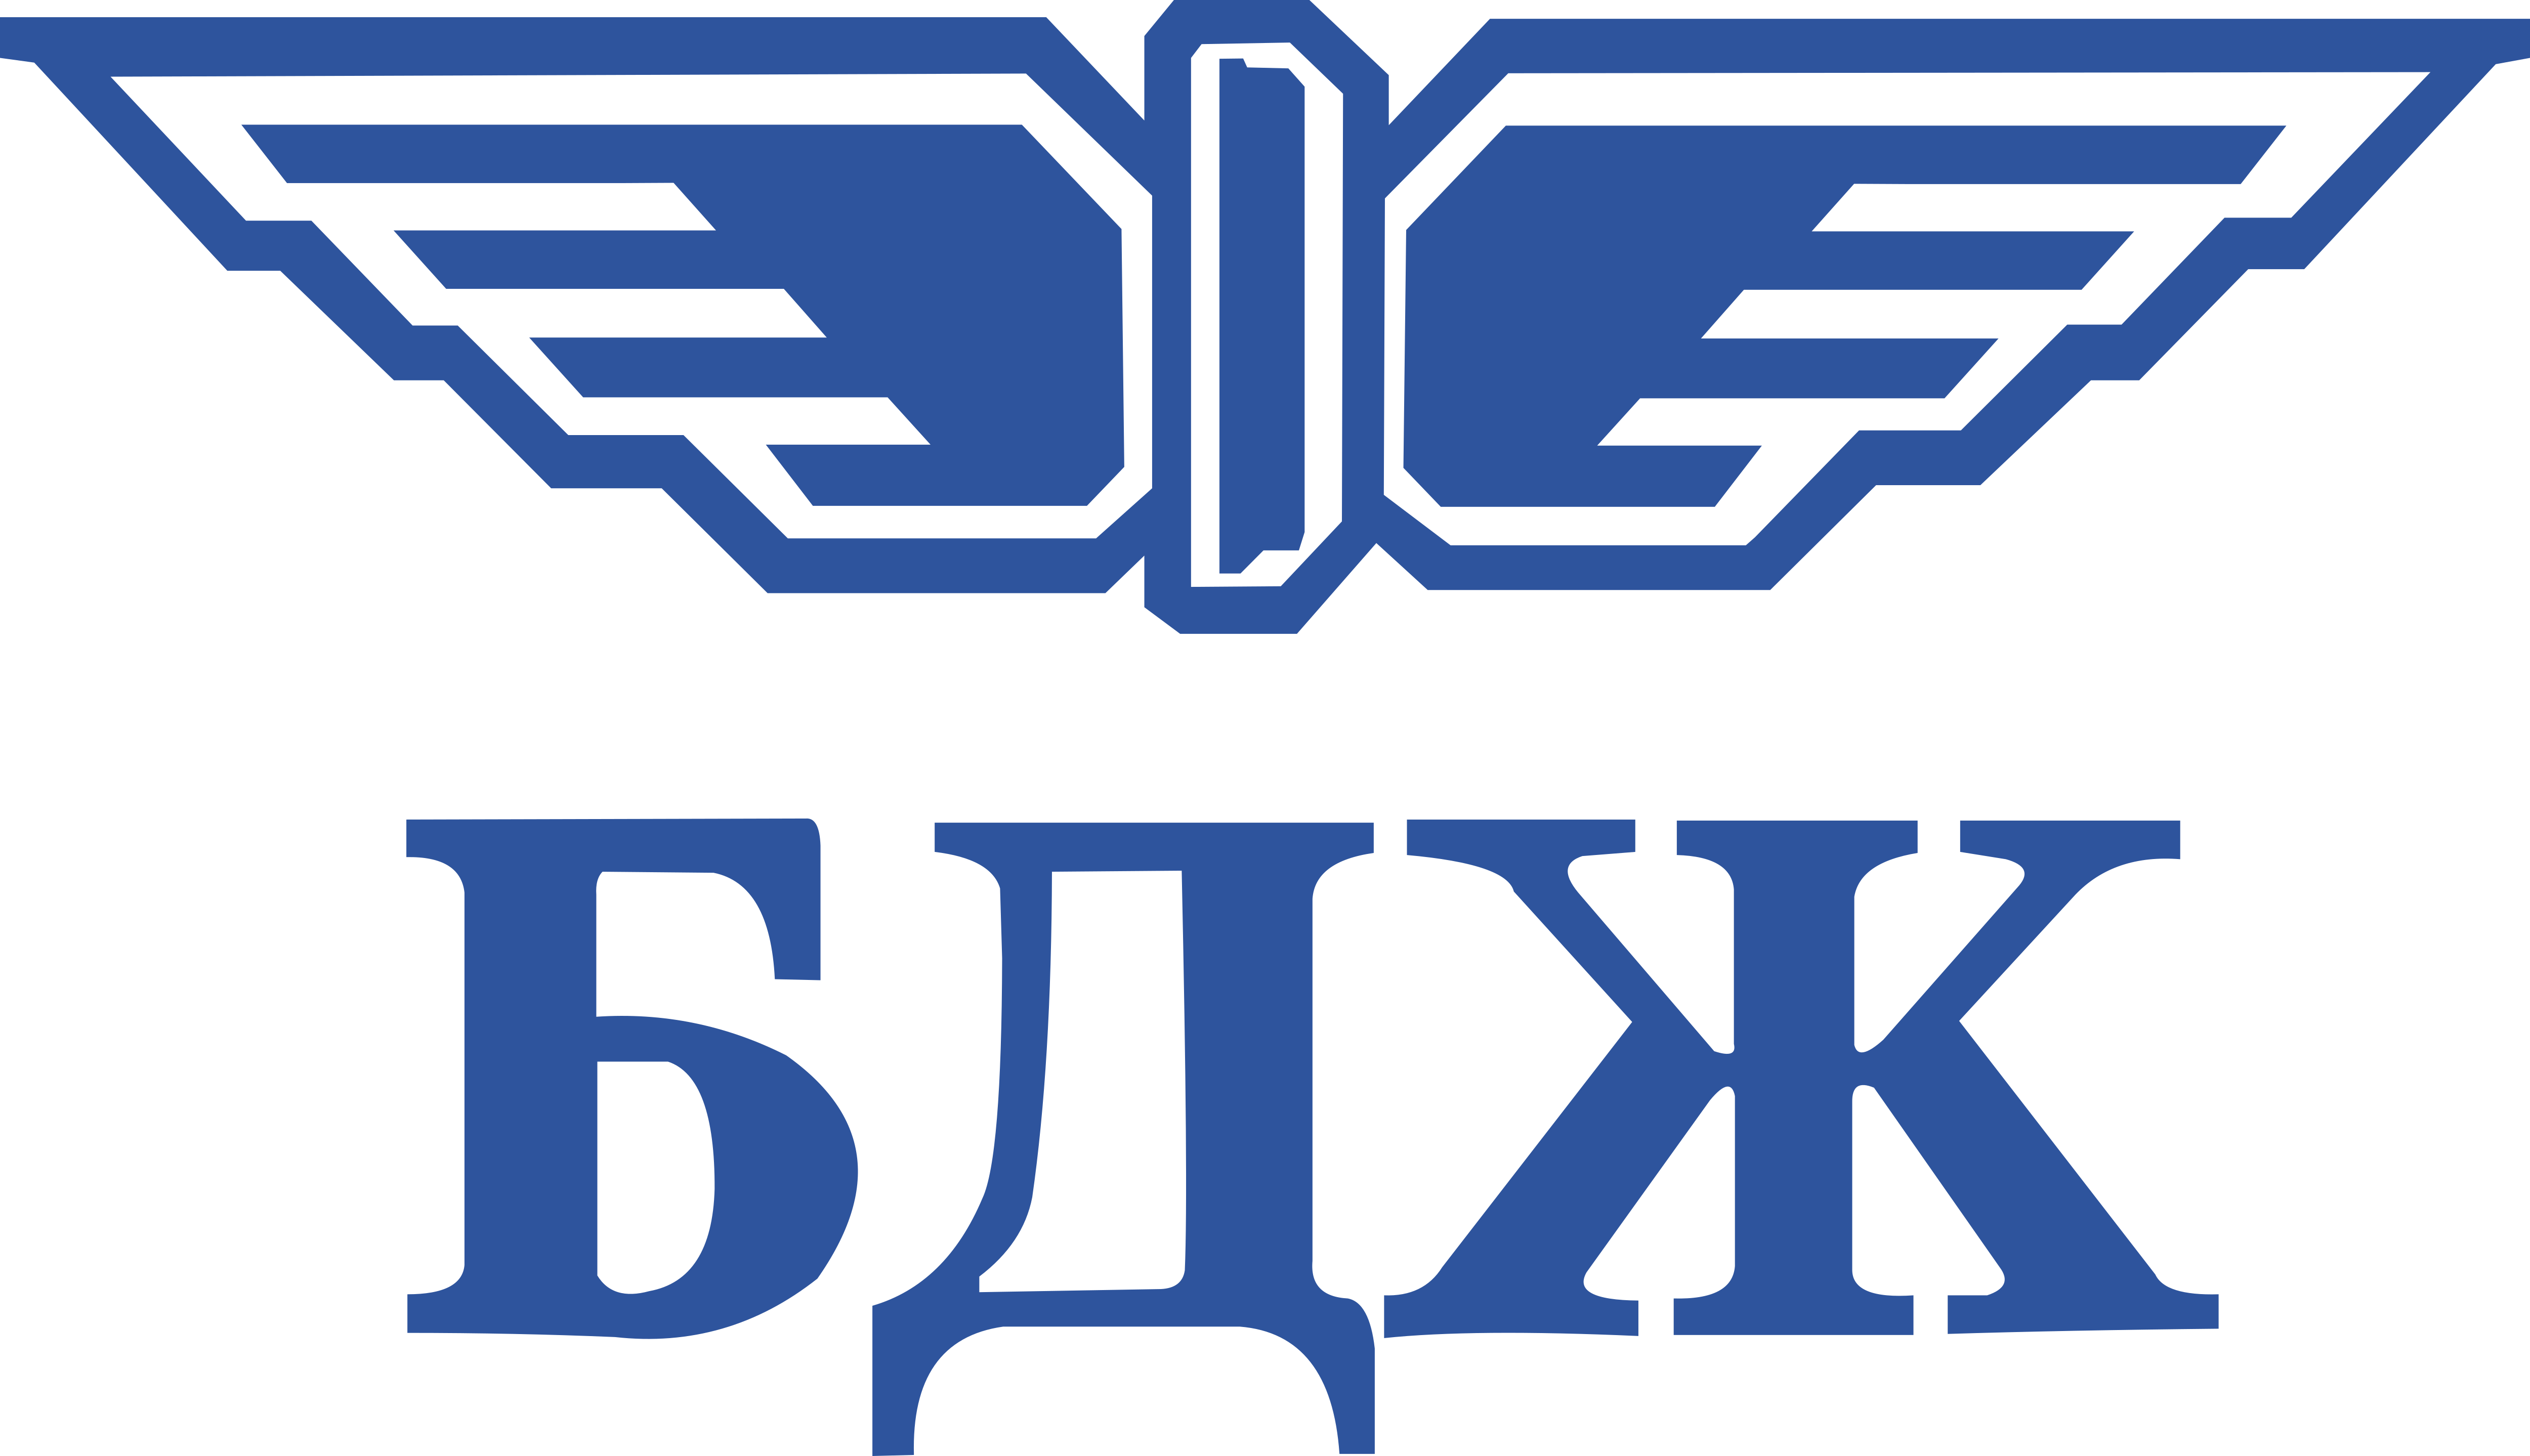 Bulgarian Railways Launches Electronic Ticketing System For Trains